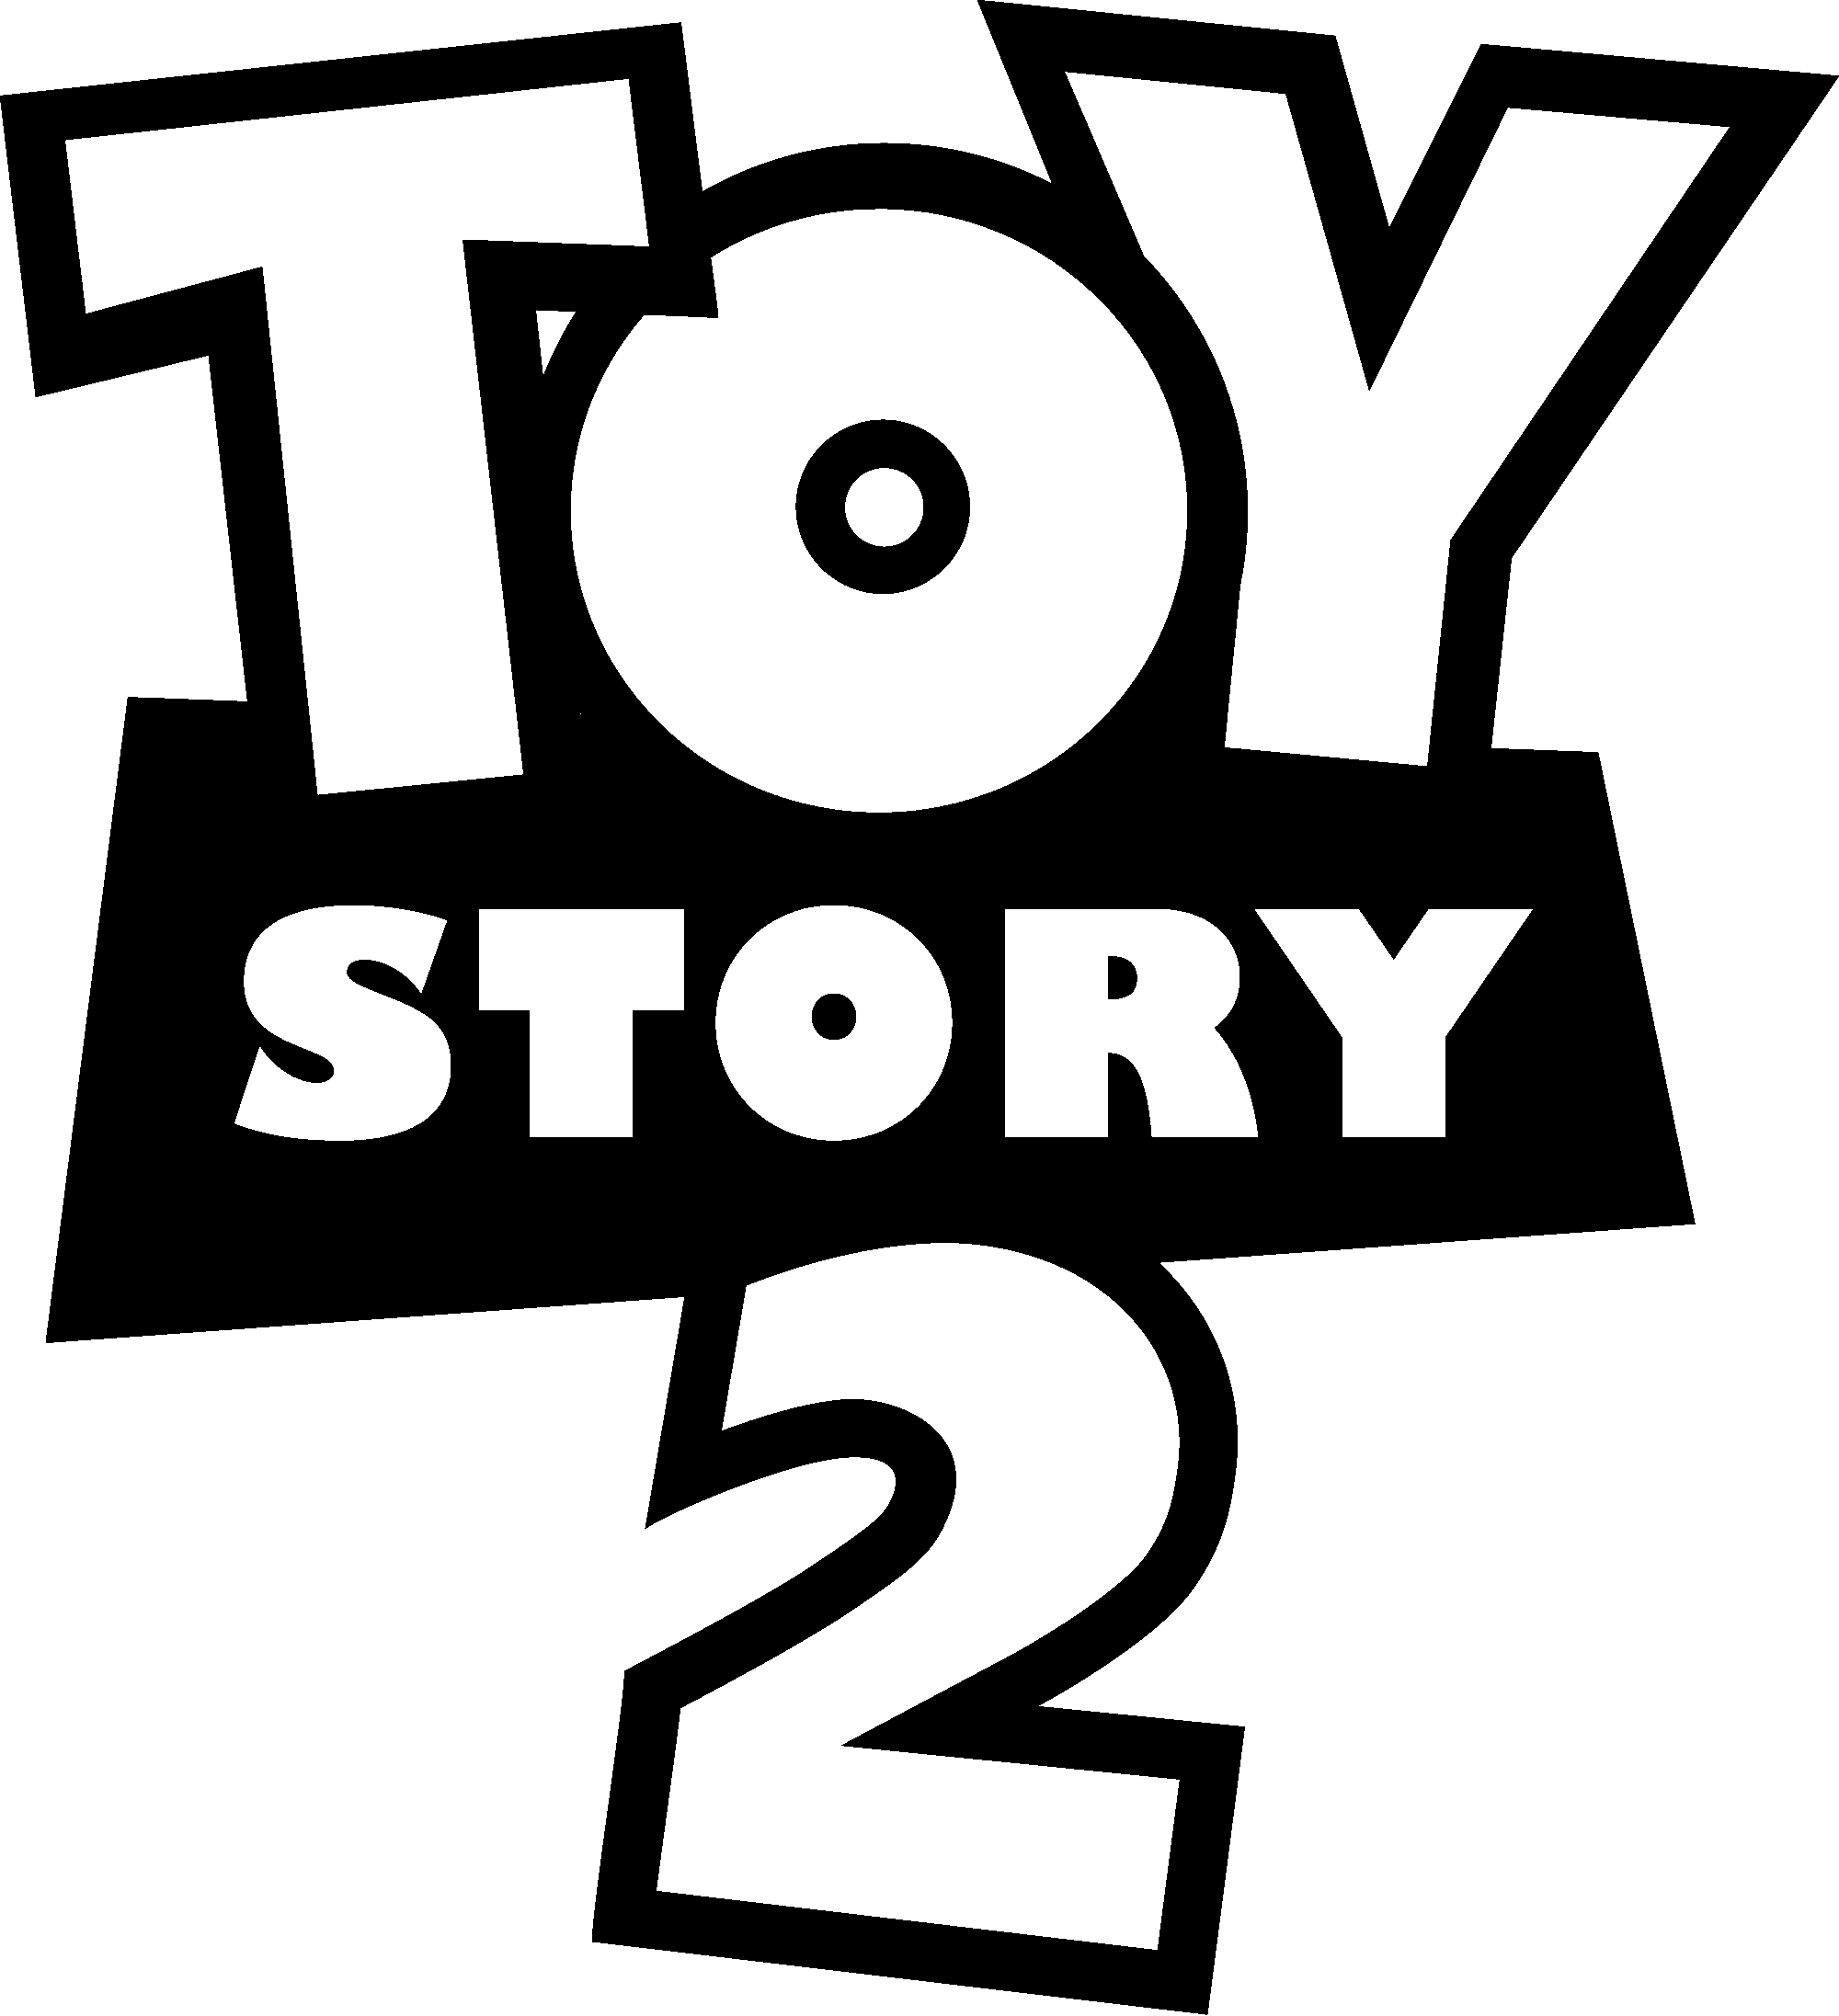 Toy Story 2 Logo - Toy Story 2 (logo).png